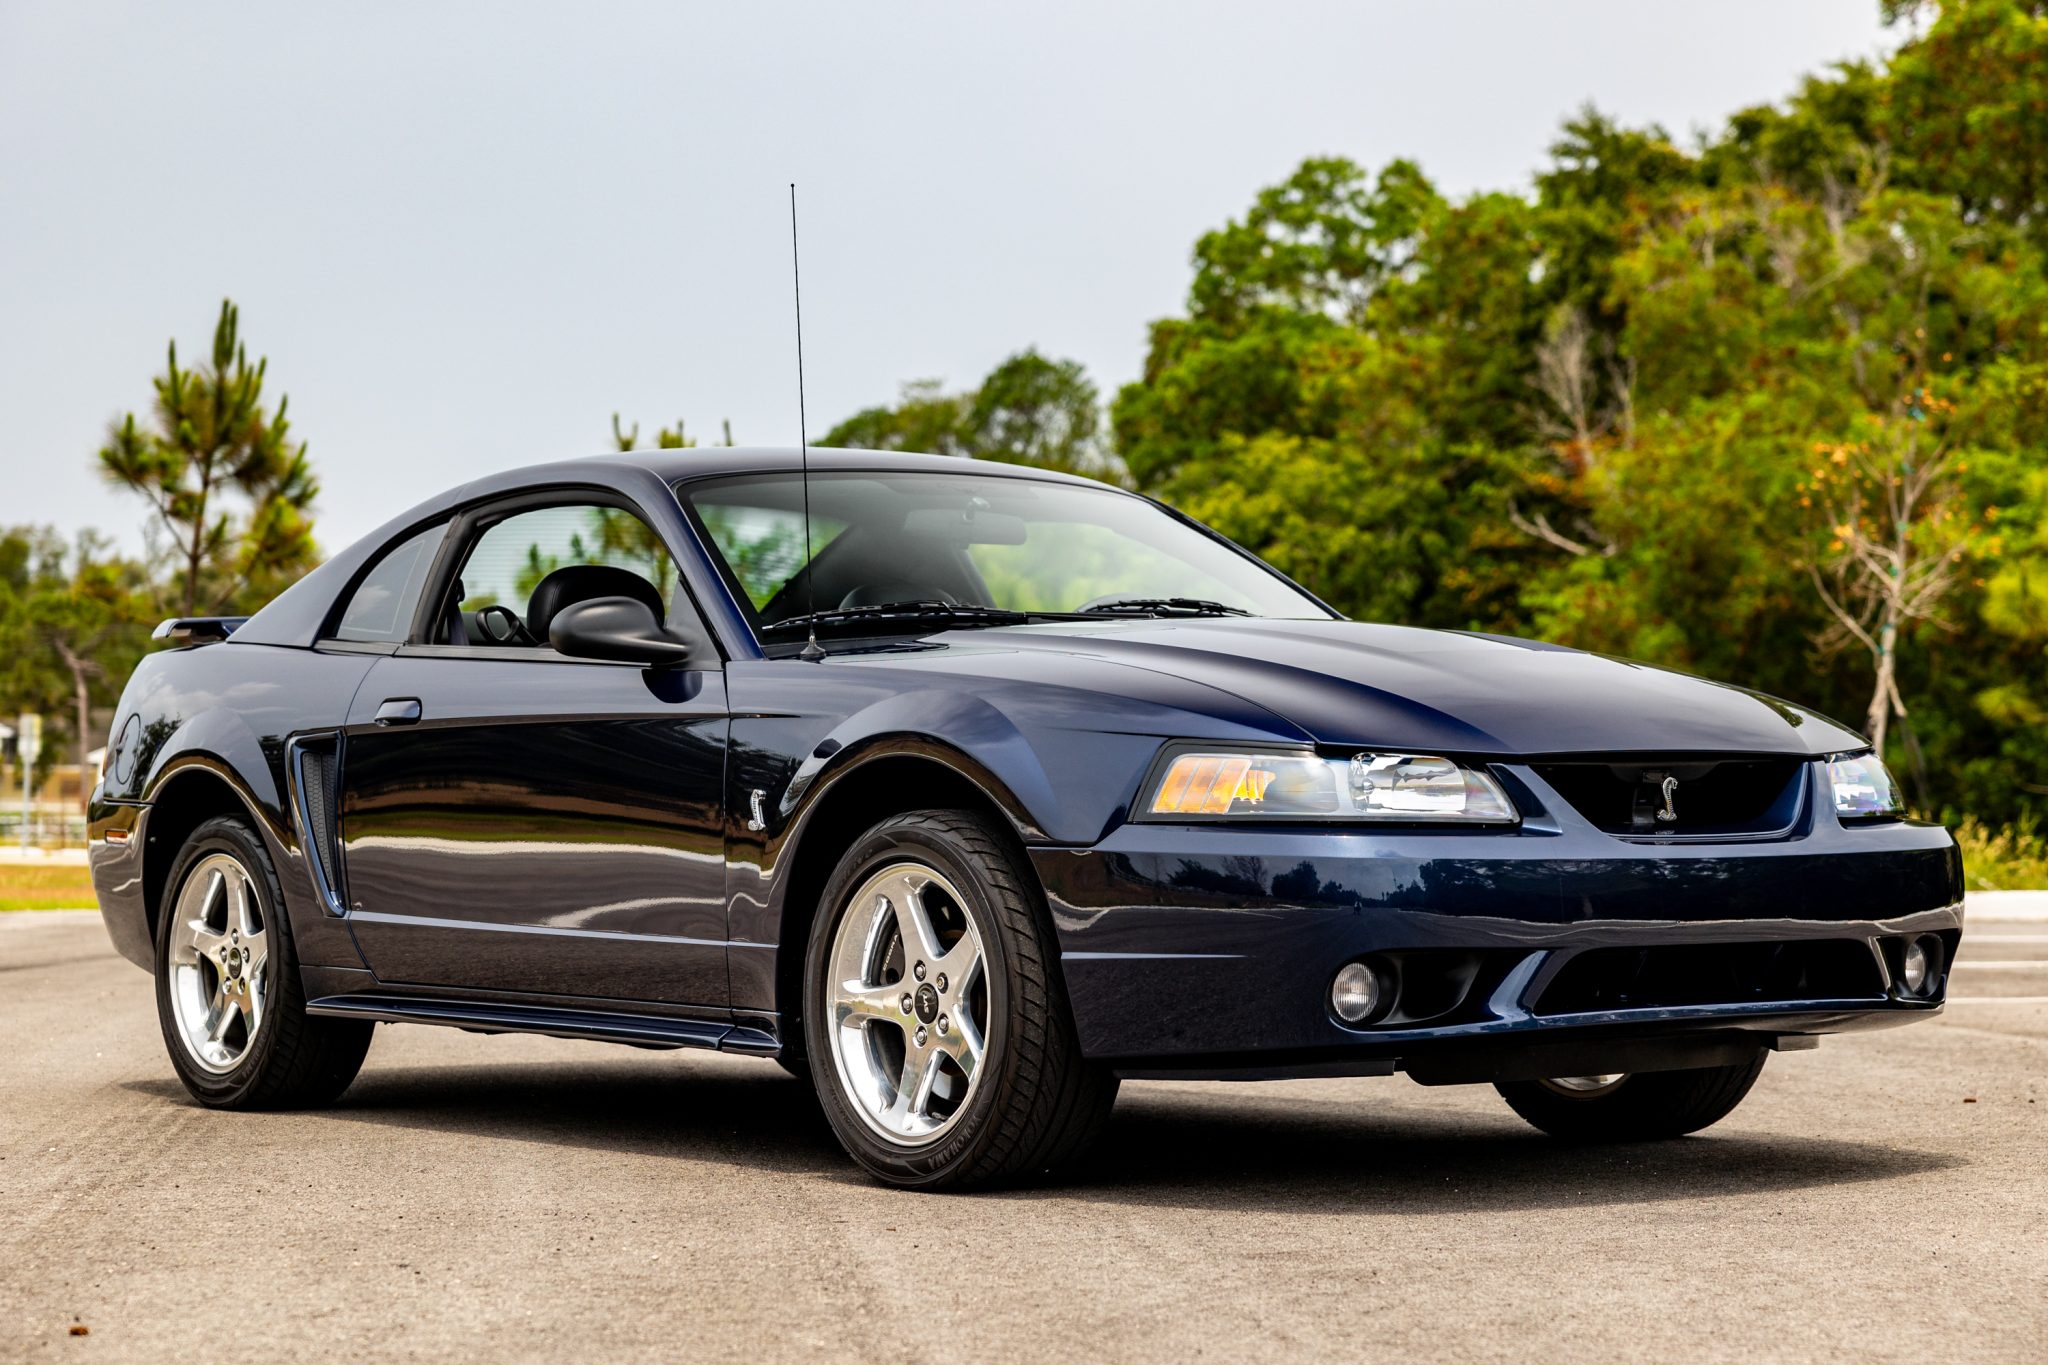 Used 21k-Mile 2001 Ford Mustang SVT Cobra Coupe Review